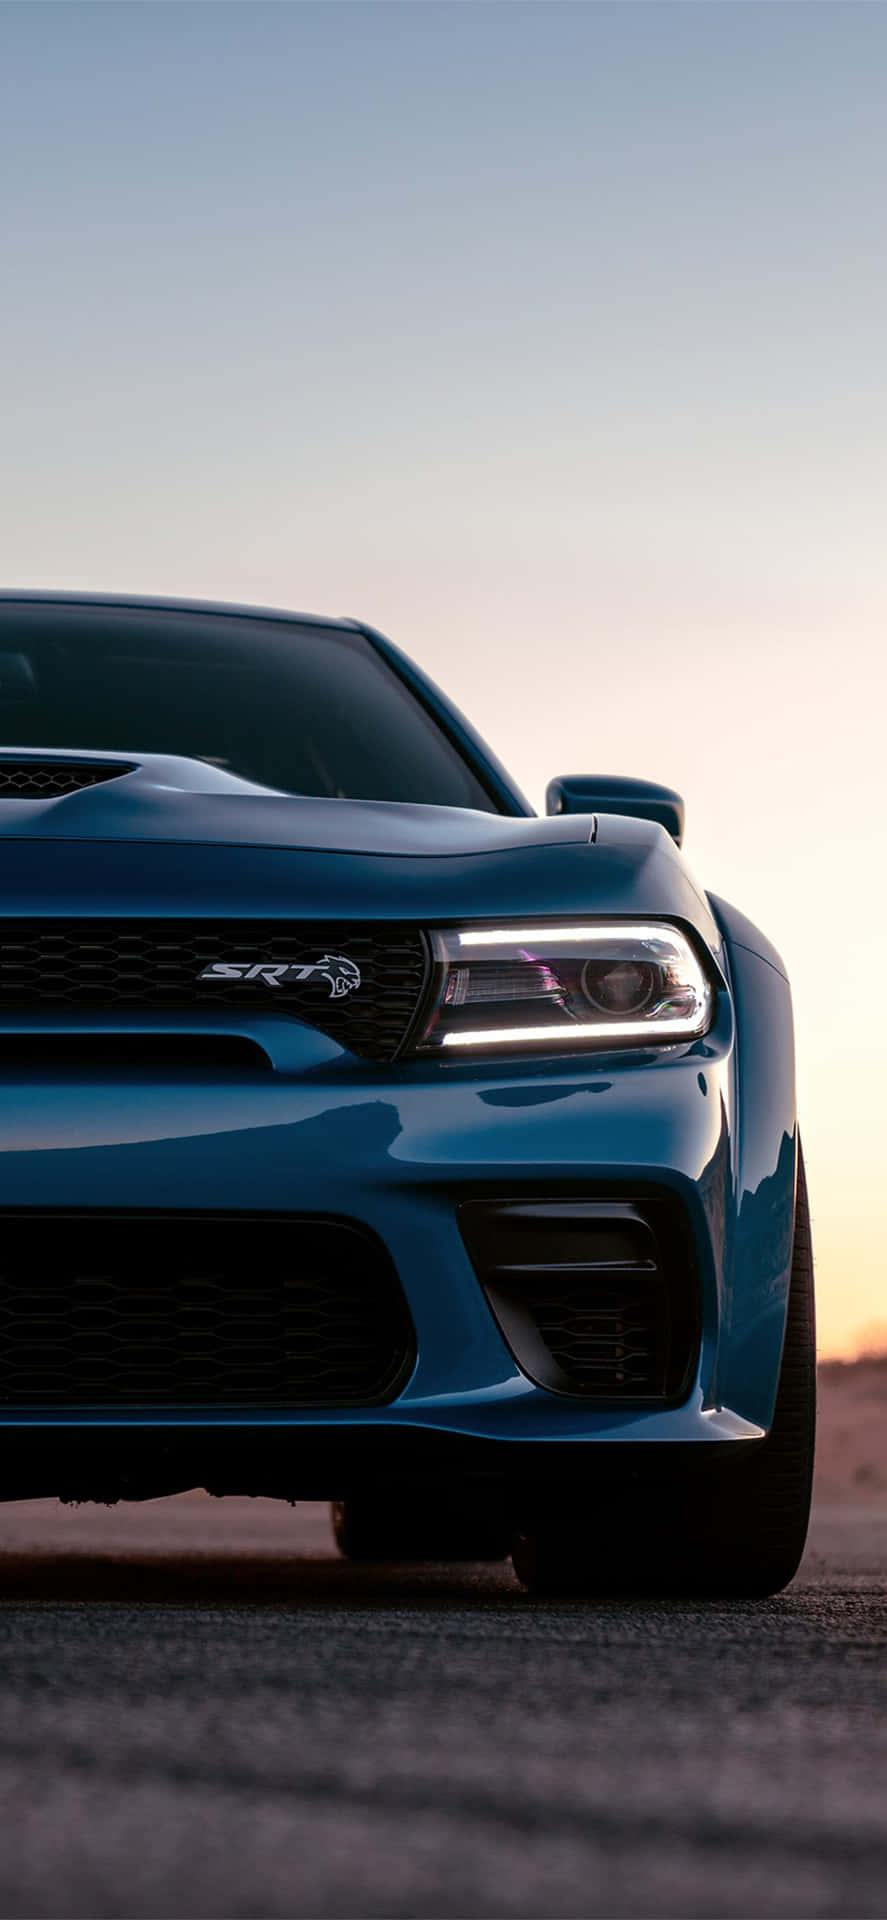 "Take your Hellcat Iphone out for a drive and get ready to have some fun" Wallpaper